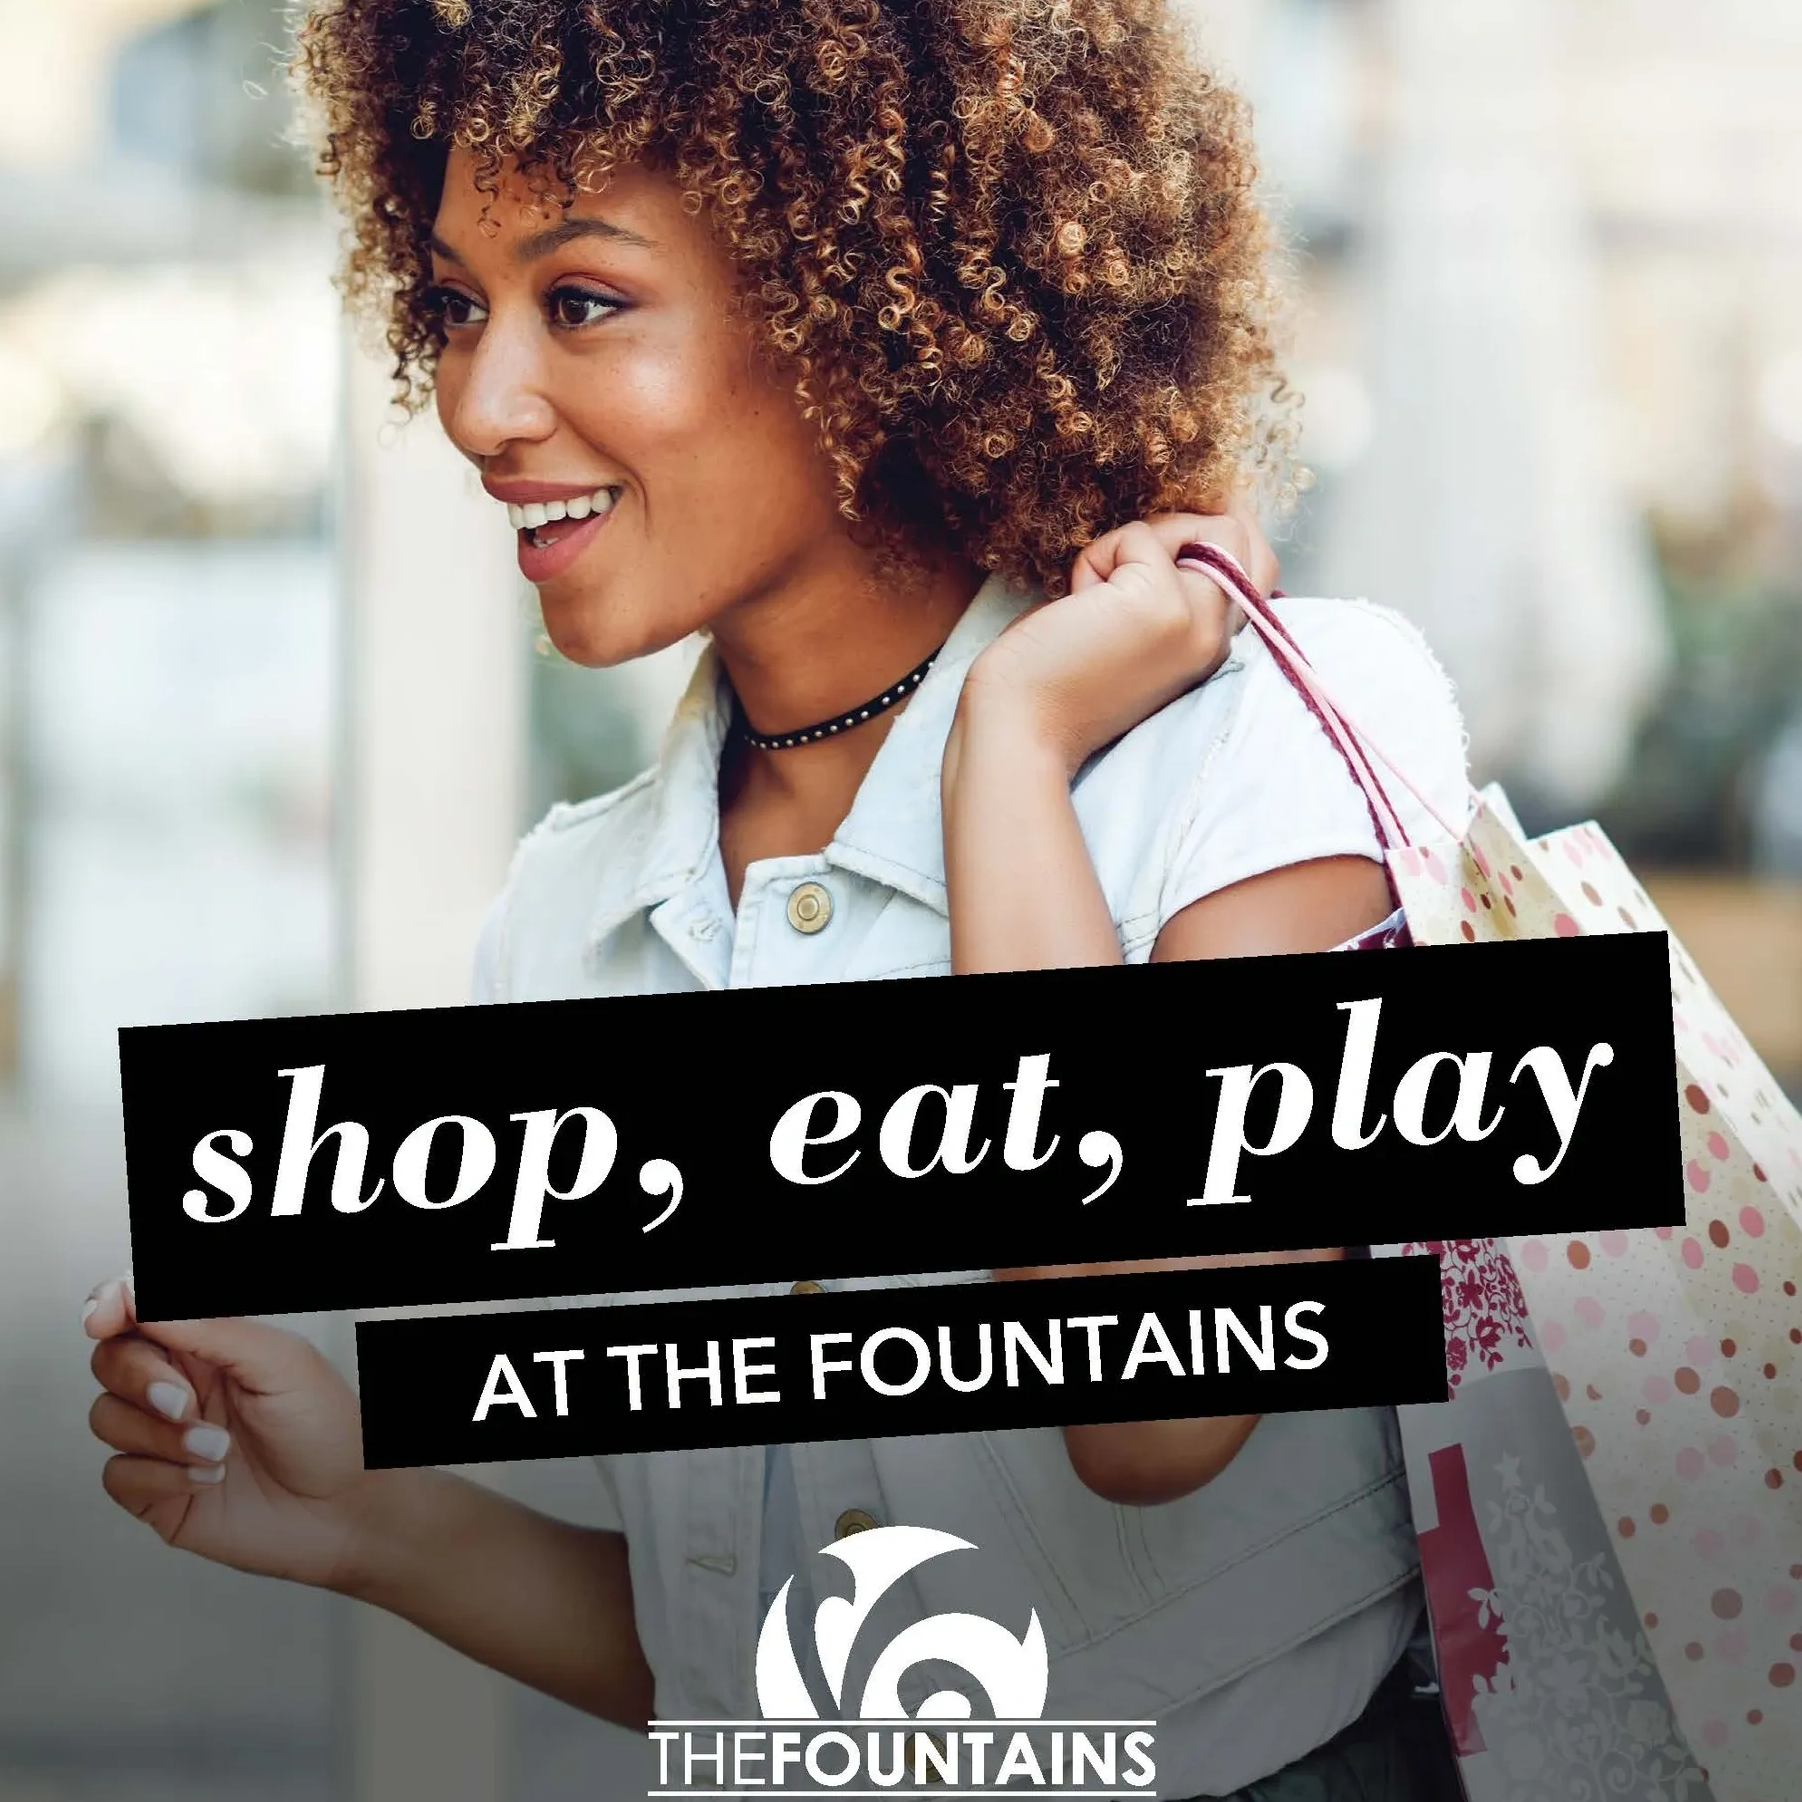 shop, eat, play at the fountains